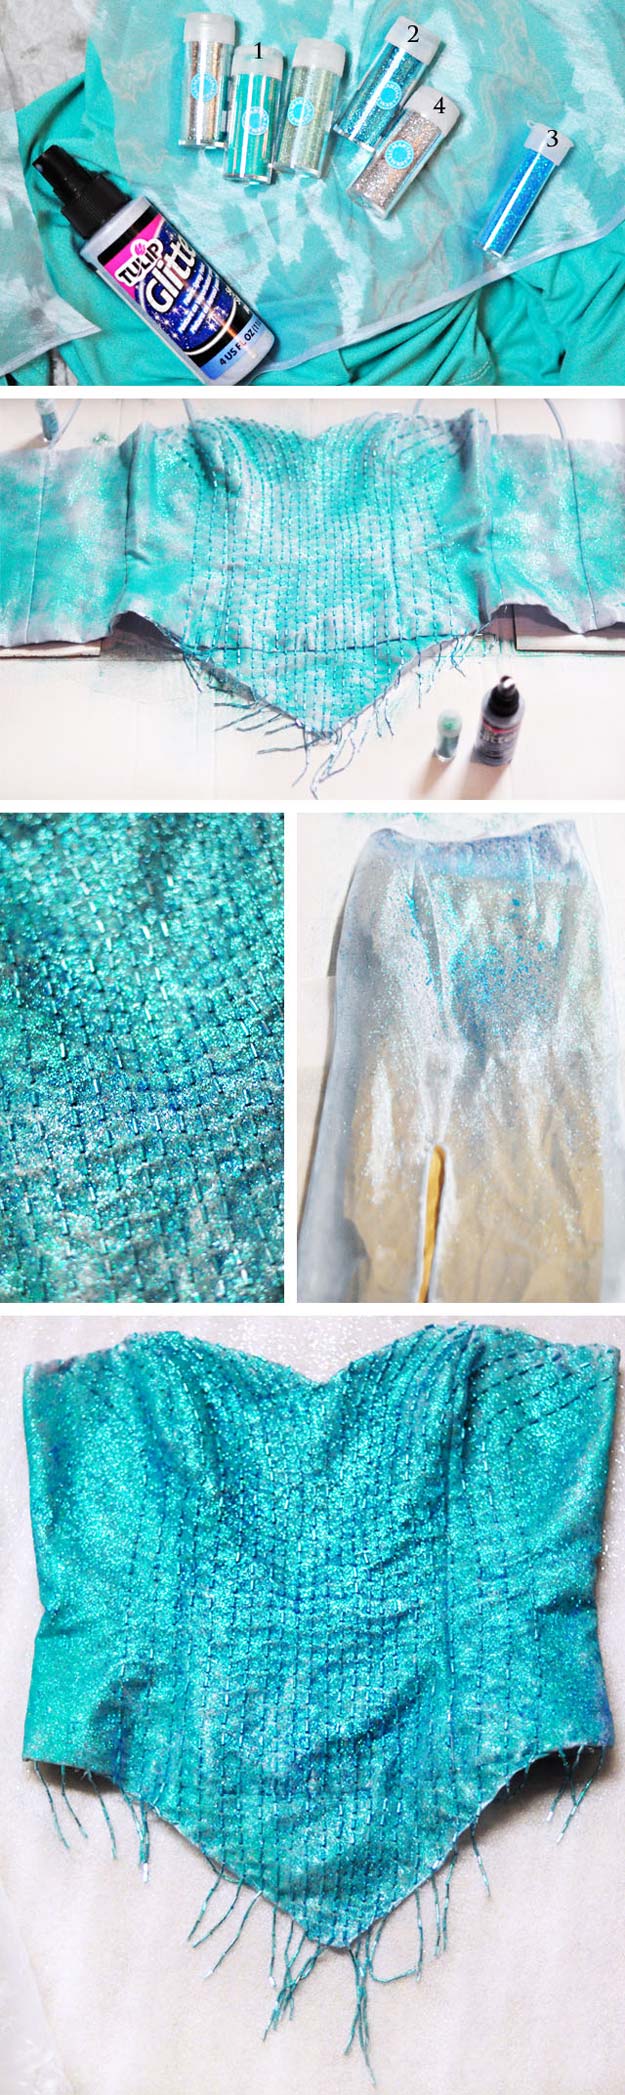 Best Last Minute DIY Halloween Costume Ideas - Frozen Queen Elsa Costume - Do It Yourself Costumes for Teens, Teenagers, Tweens, Teenage Boys and Girls, Friends. Fun, Clever, Cheap and Creative Costumes that Are Easy To Make. Step by Step Tutorials and Instructions #halloween #costumeideas #halloweencostumes